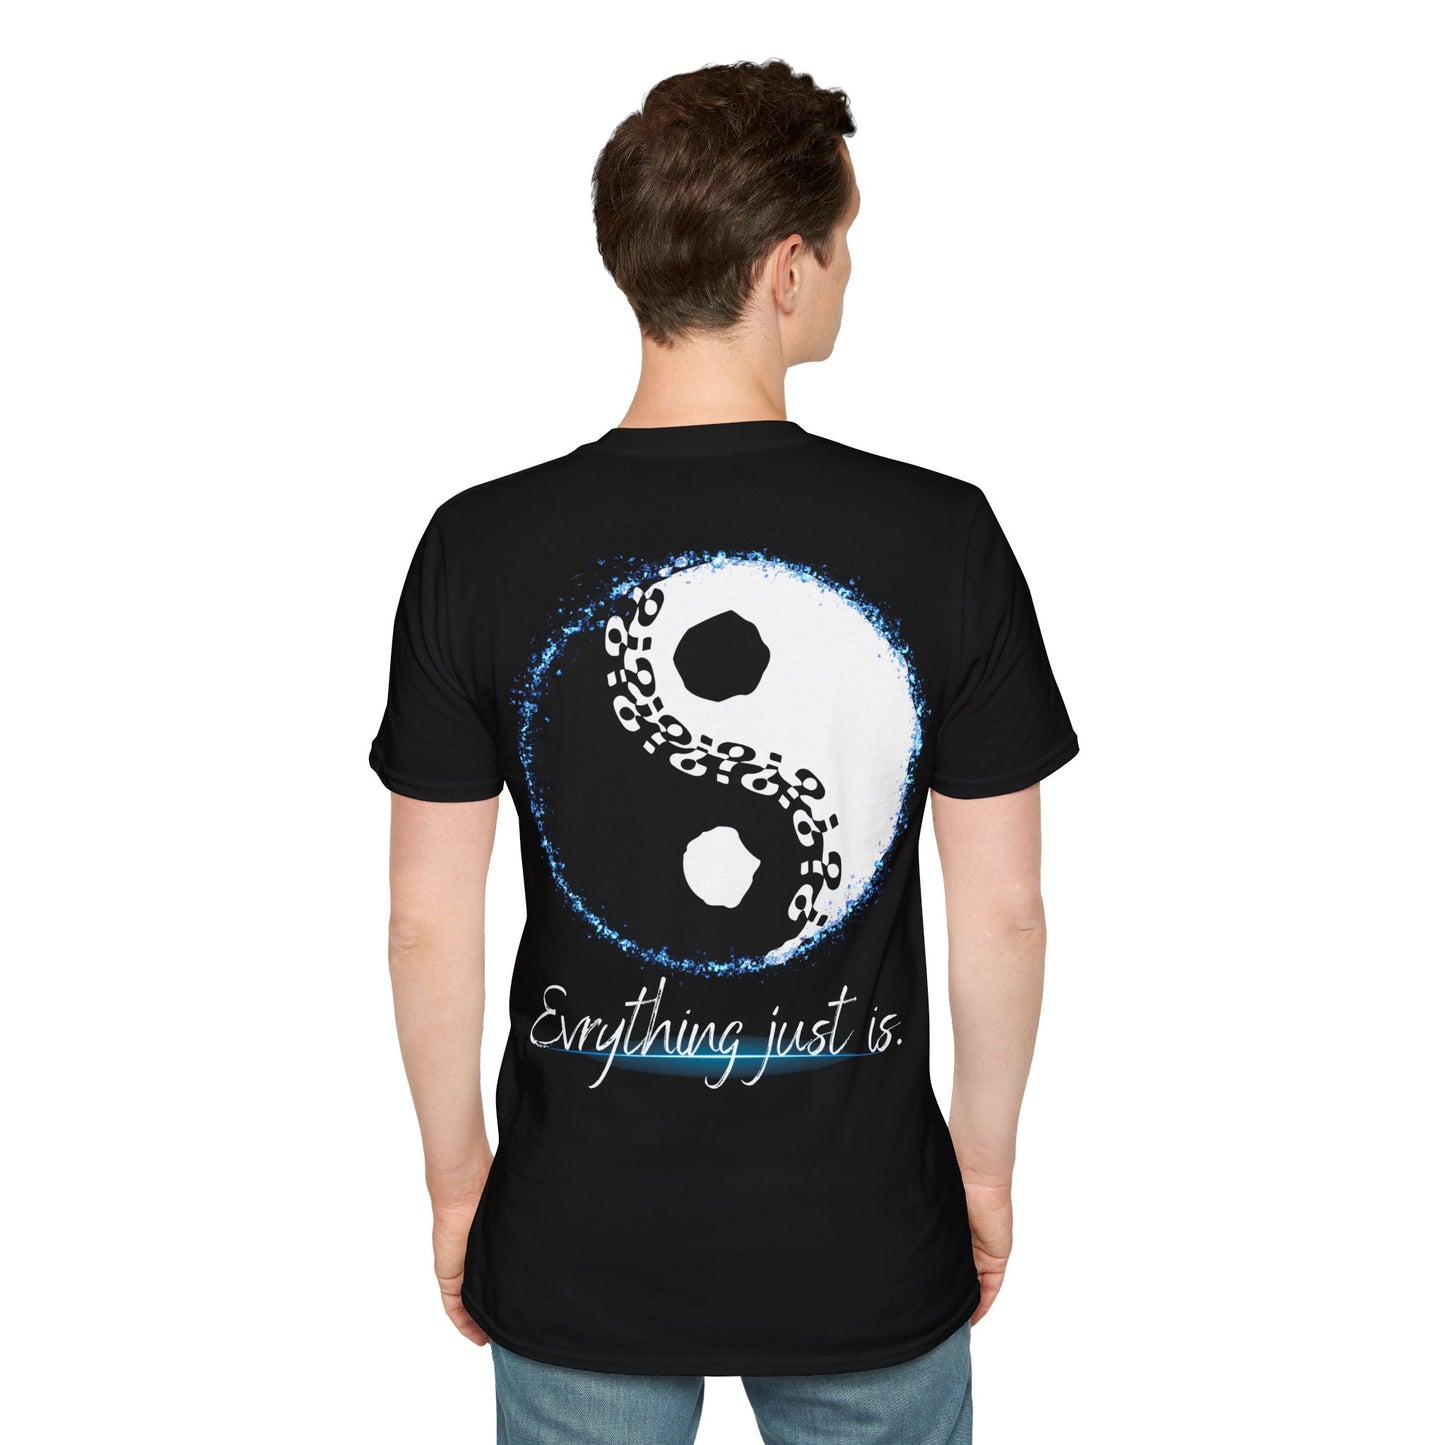 Yin Yang Eveything Just is Not Aggressive. POWERFUL™️ Unisex Softstyle T-Shirt